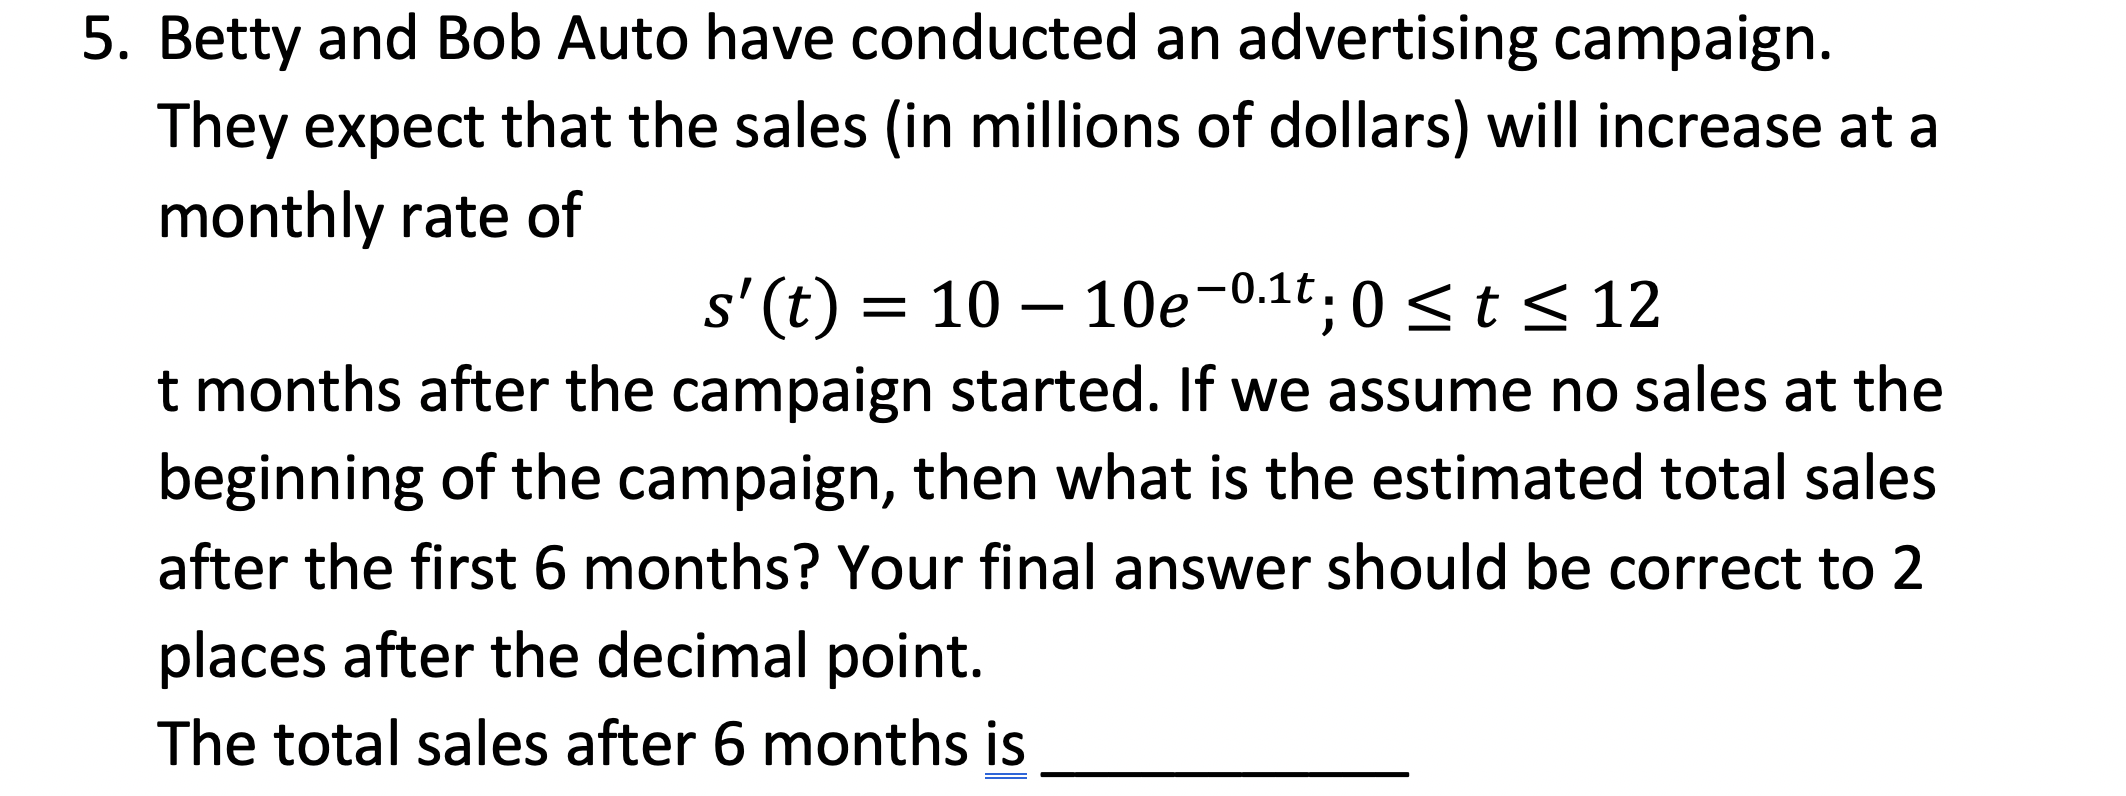 5. Betty and Bob Auto have conducted an advertising campaign.
They expect that the sales (in millions of dollars) will increase at a
monthly rate of
s' (t) = 10 – 10e-0.1t. 0 <t < 12
t months after the campaign started. If we assume no sales at the
beginning of the campaign, then what is the estimated total sales
after the first 6 months? Your final answer should be correct to 2
places after the decimal point.
The total sales after 6 months is
